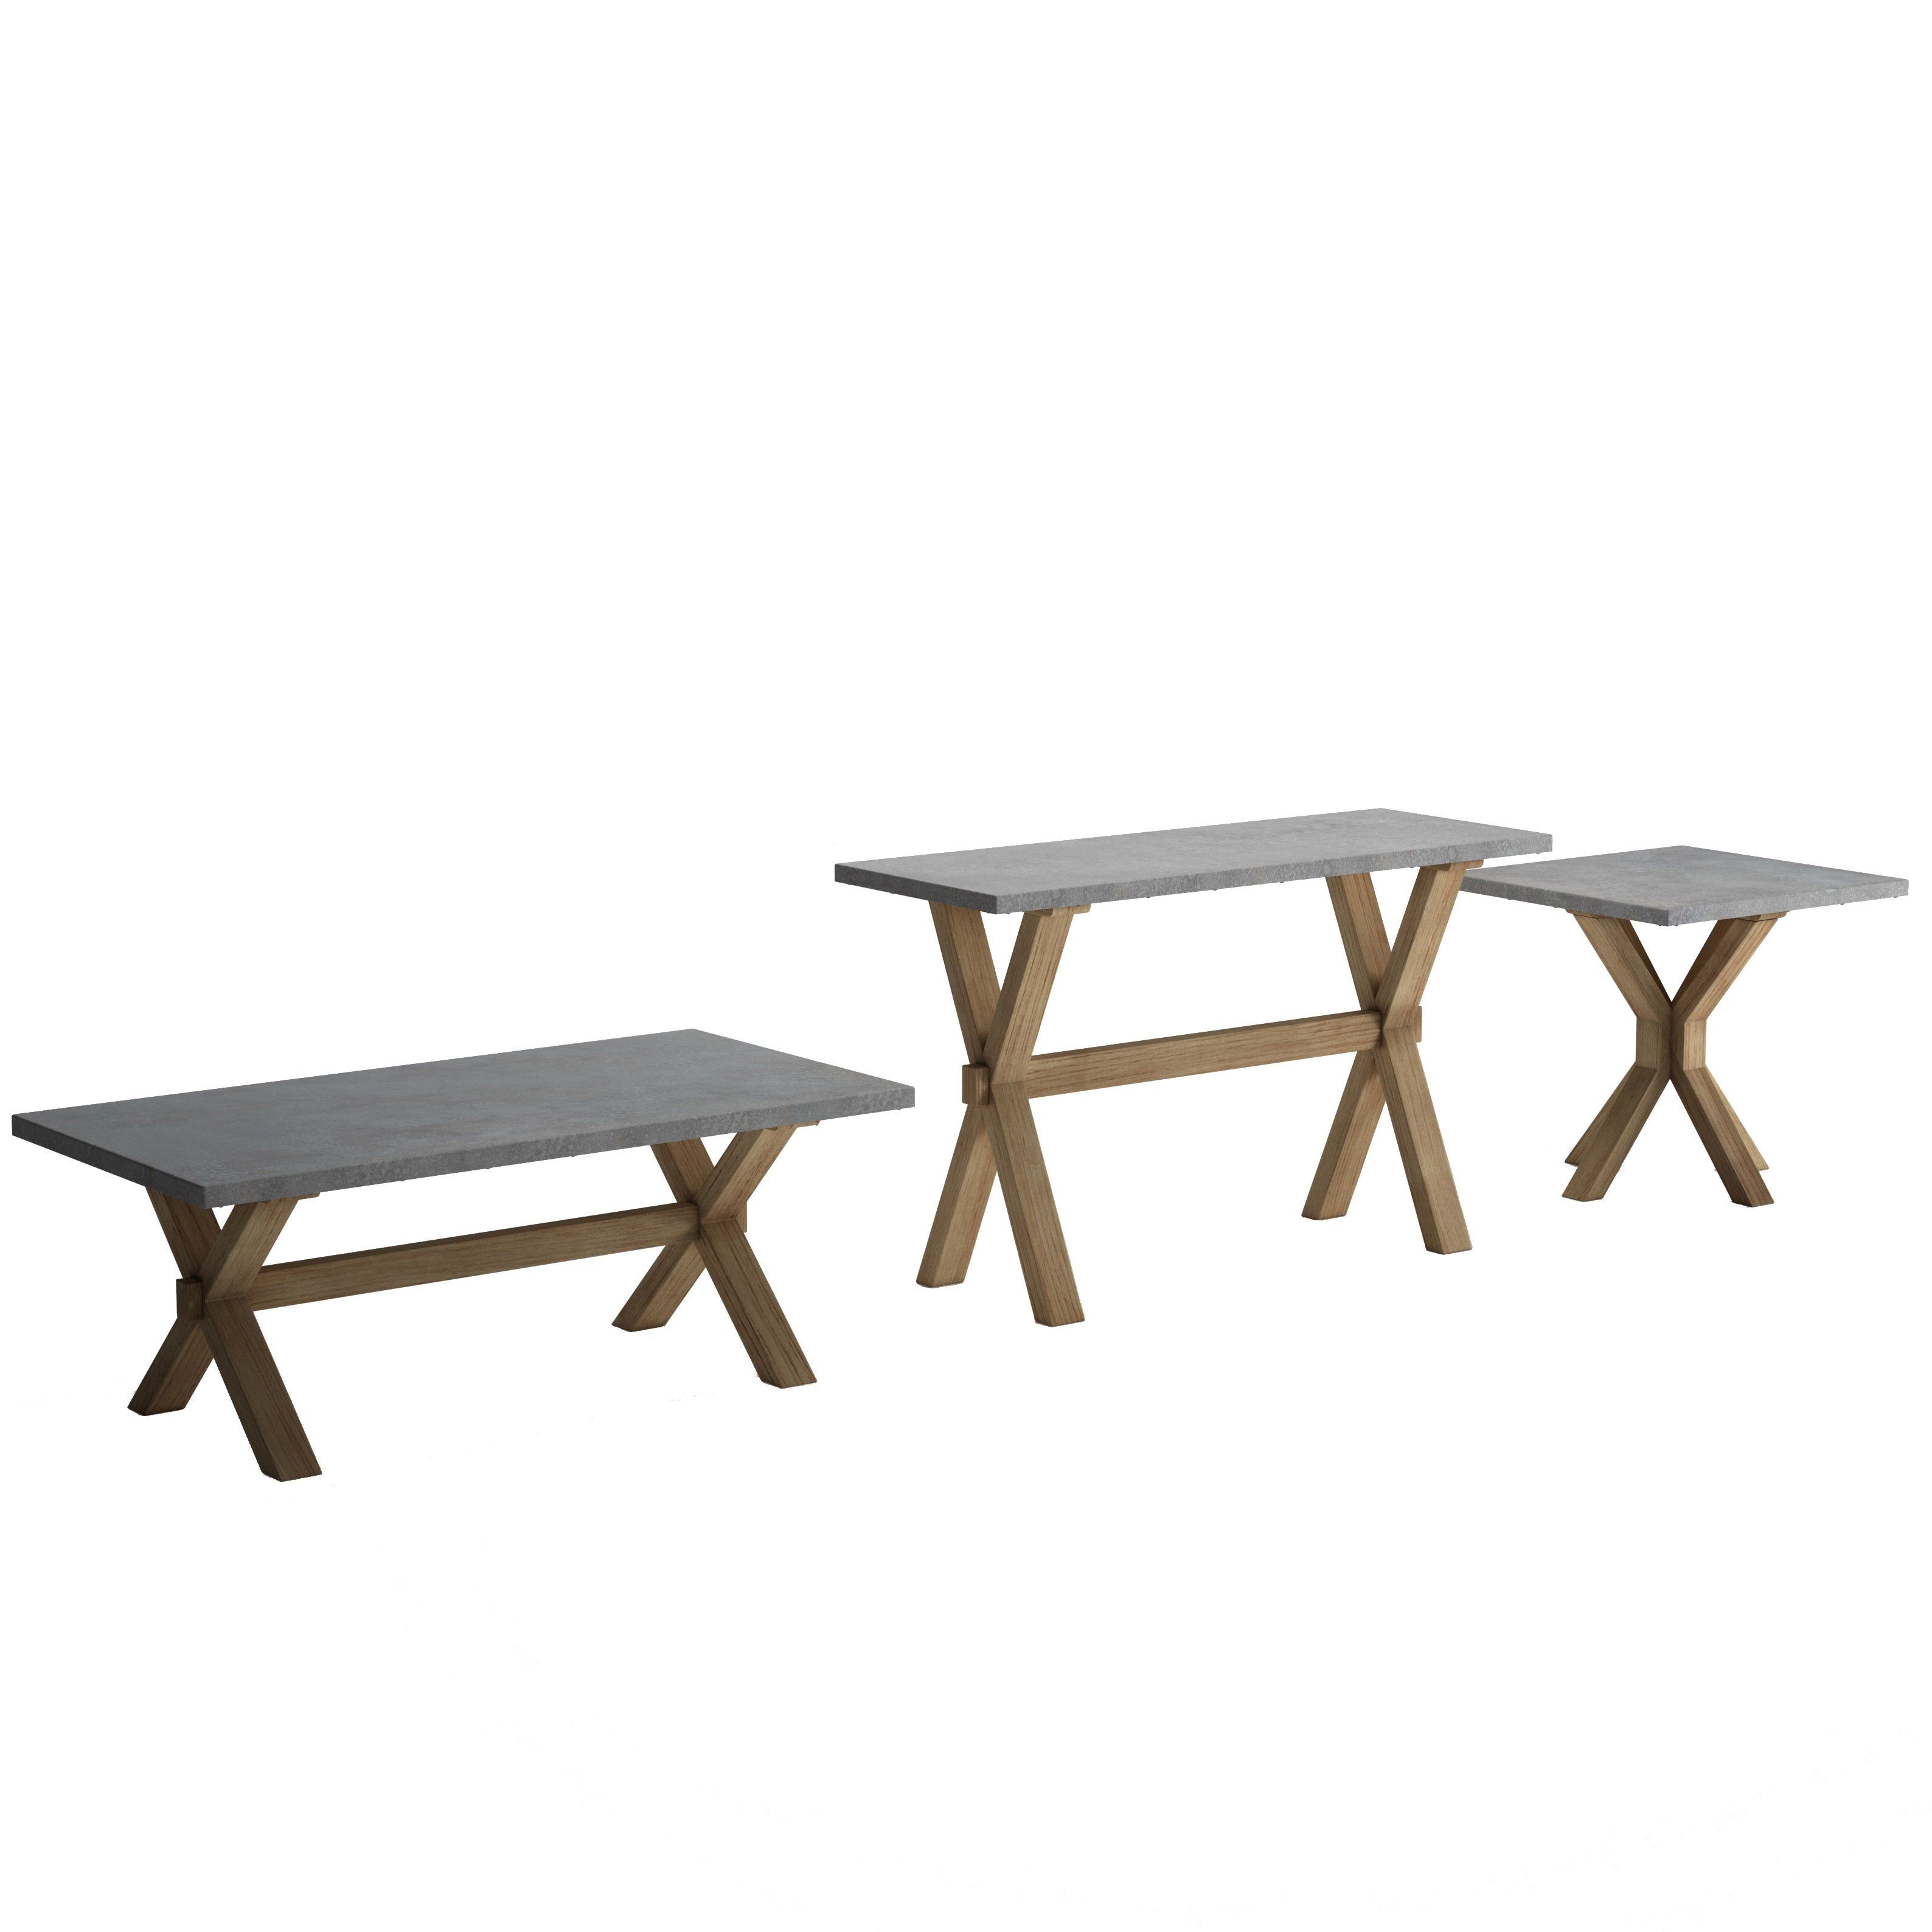 Aberdeen Industrial Zinc Top Weathered Oak Trestle 3 Piece Table Set Inspire Q Artisan For Most Recent Aberdeen Industrial Zinc Top Weathered Oak Trestle Coffee Tables (View 4 of 20)